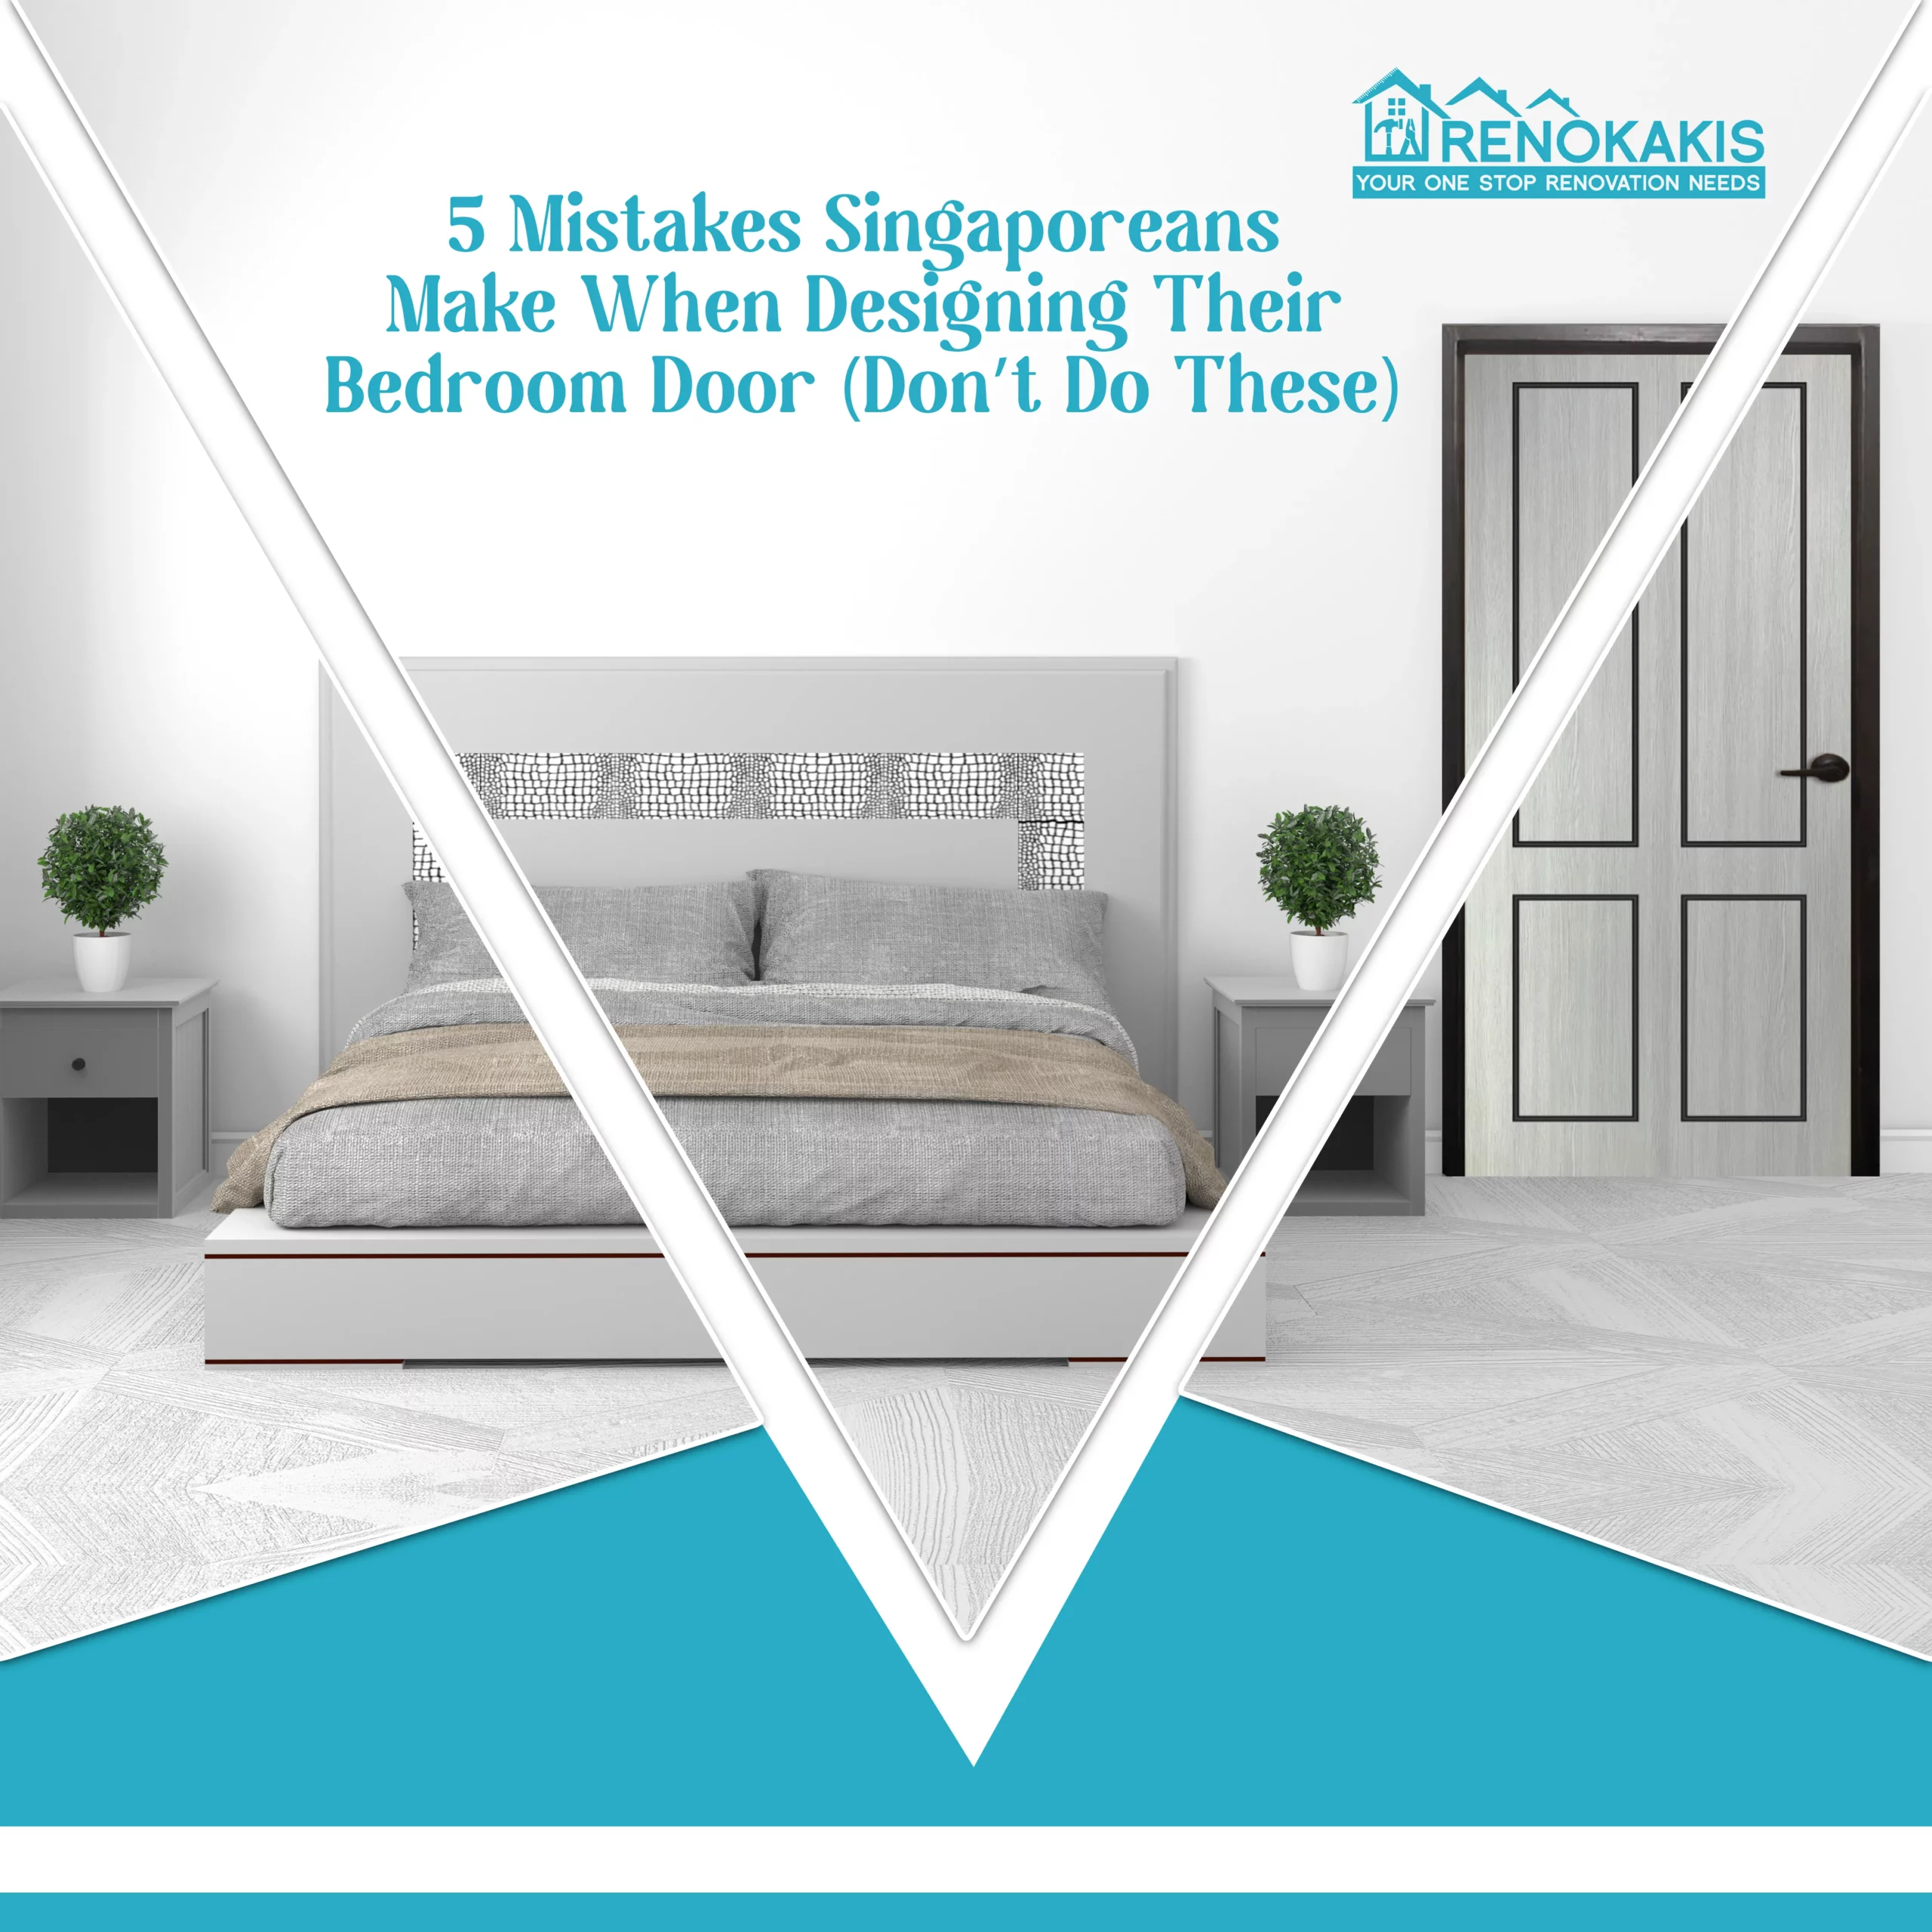 5 Mistakes Singaporeans Make When Designing Their Bedroom Door (Don't Do These!)